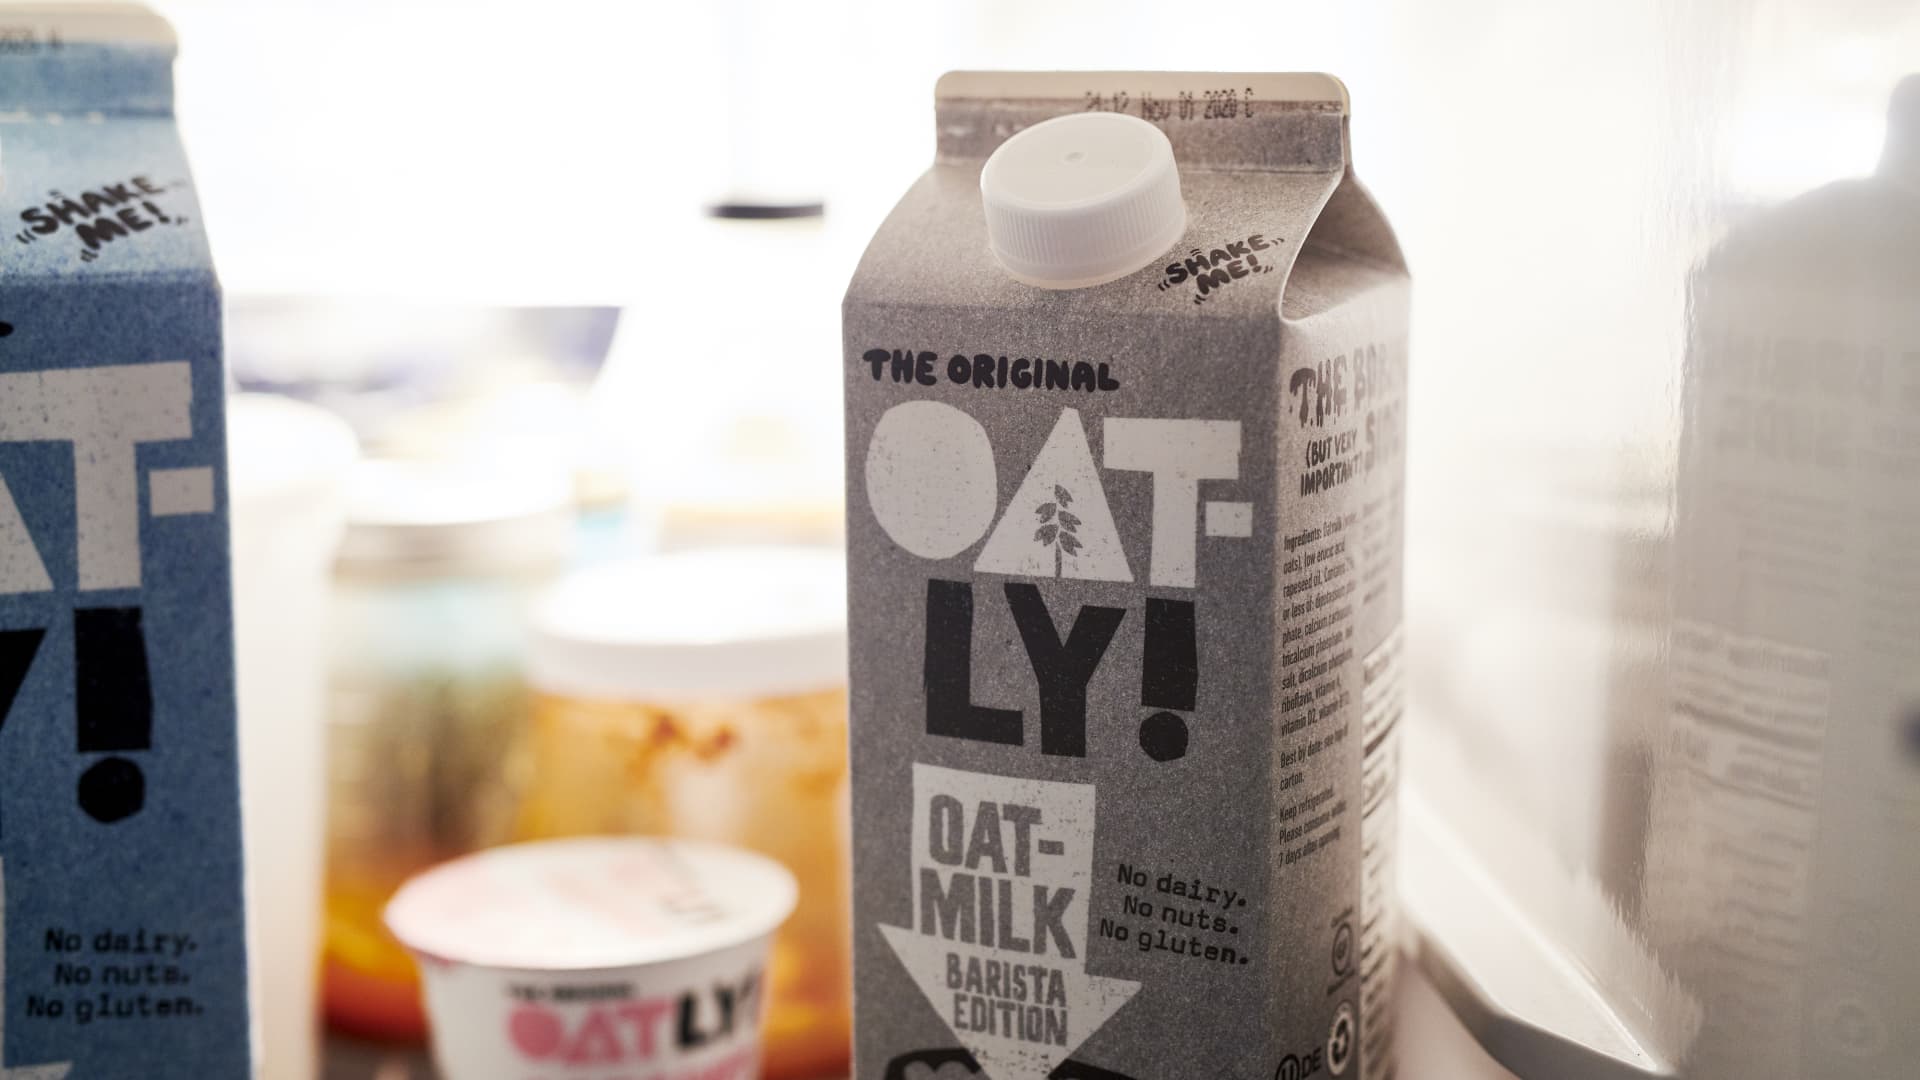 Stocks making the biggest moves midday: Oatly, Amazon, Hasbro and more